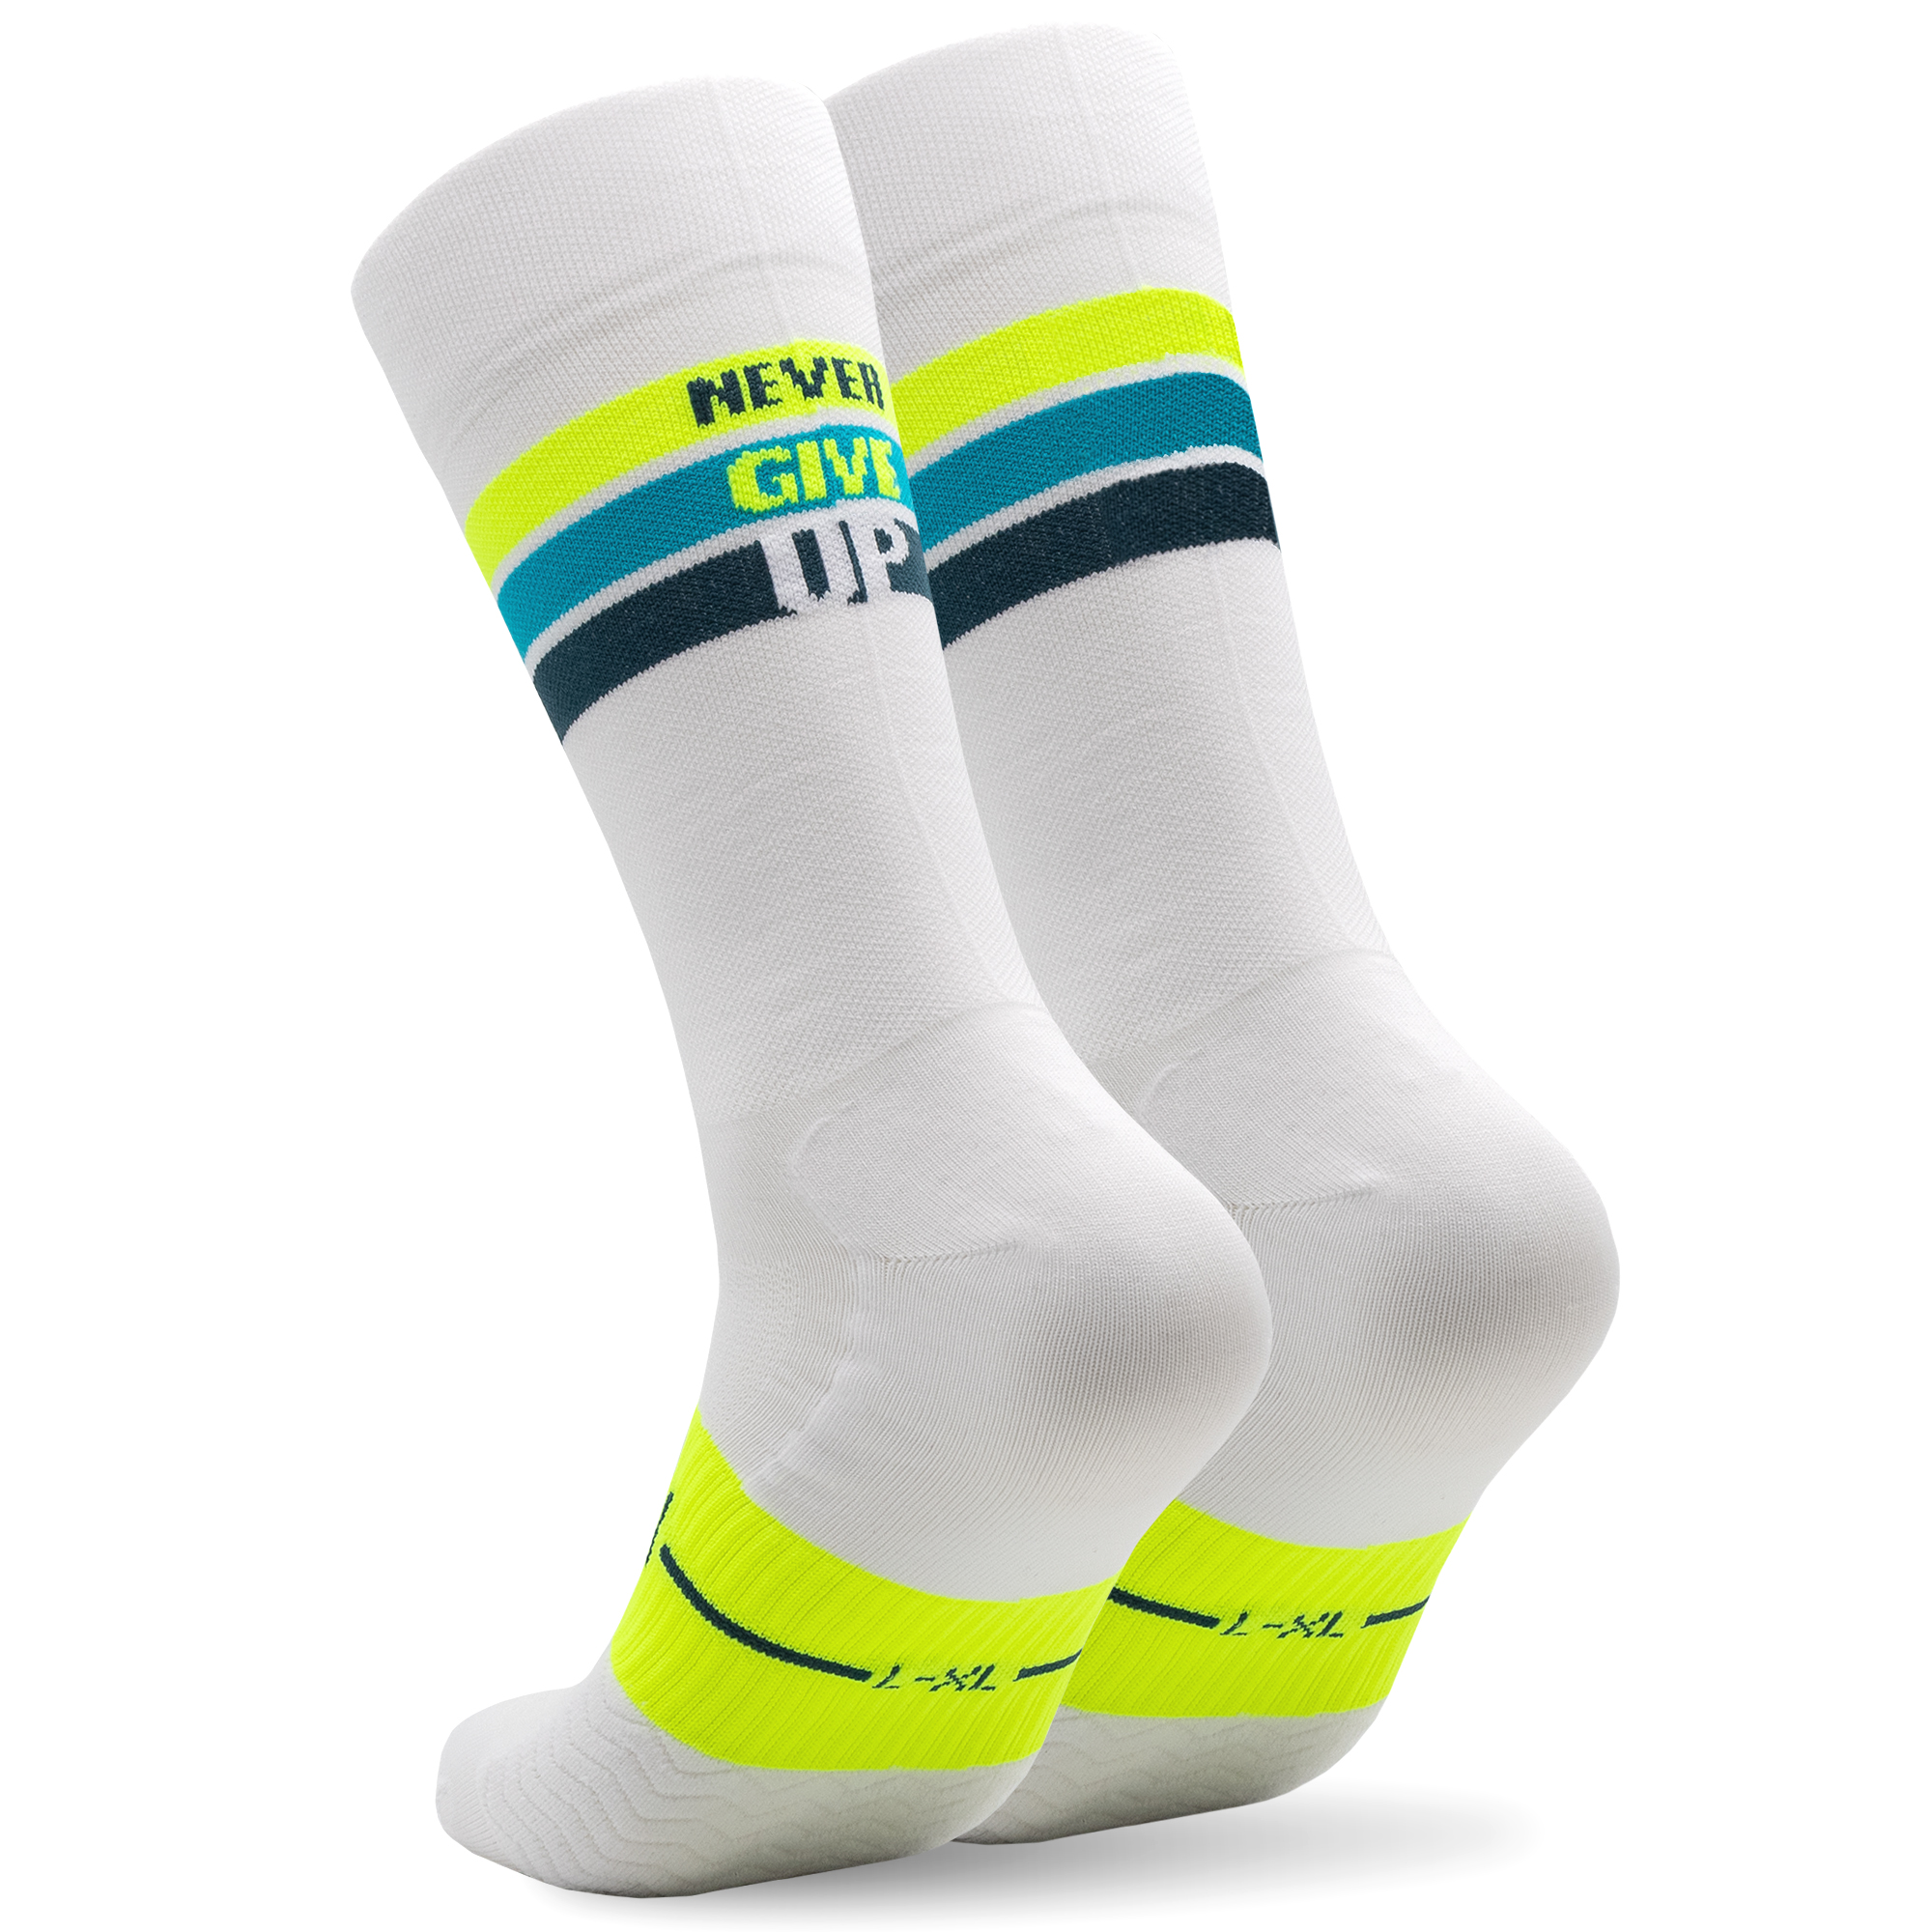 Calcetines Ciclismo y Running - NEVER GIVE UP - Nortei